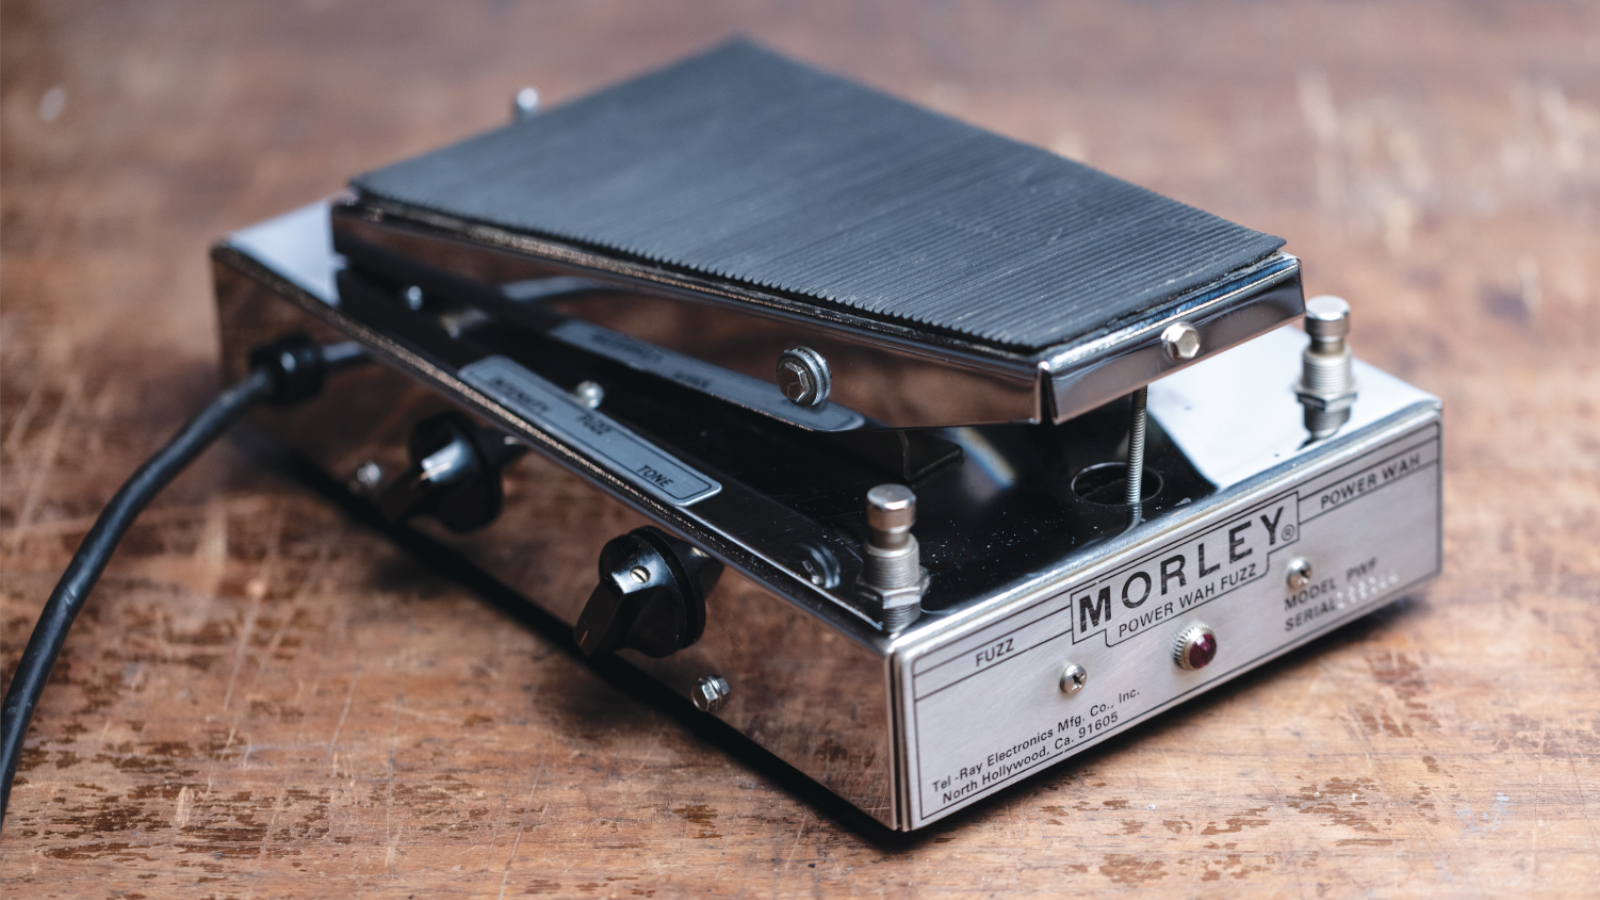 Introduced in the 1970s, Morley's PWF Power Wah Fuzz Pedal Was the